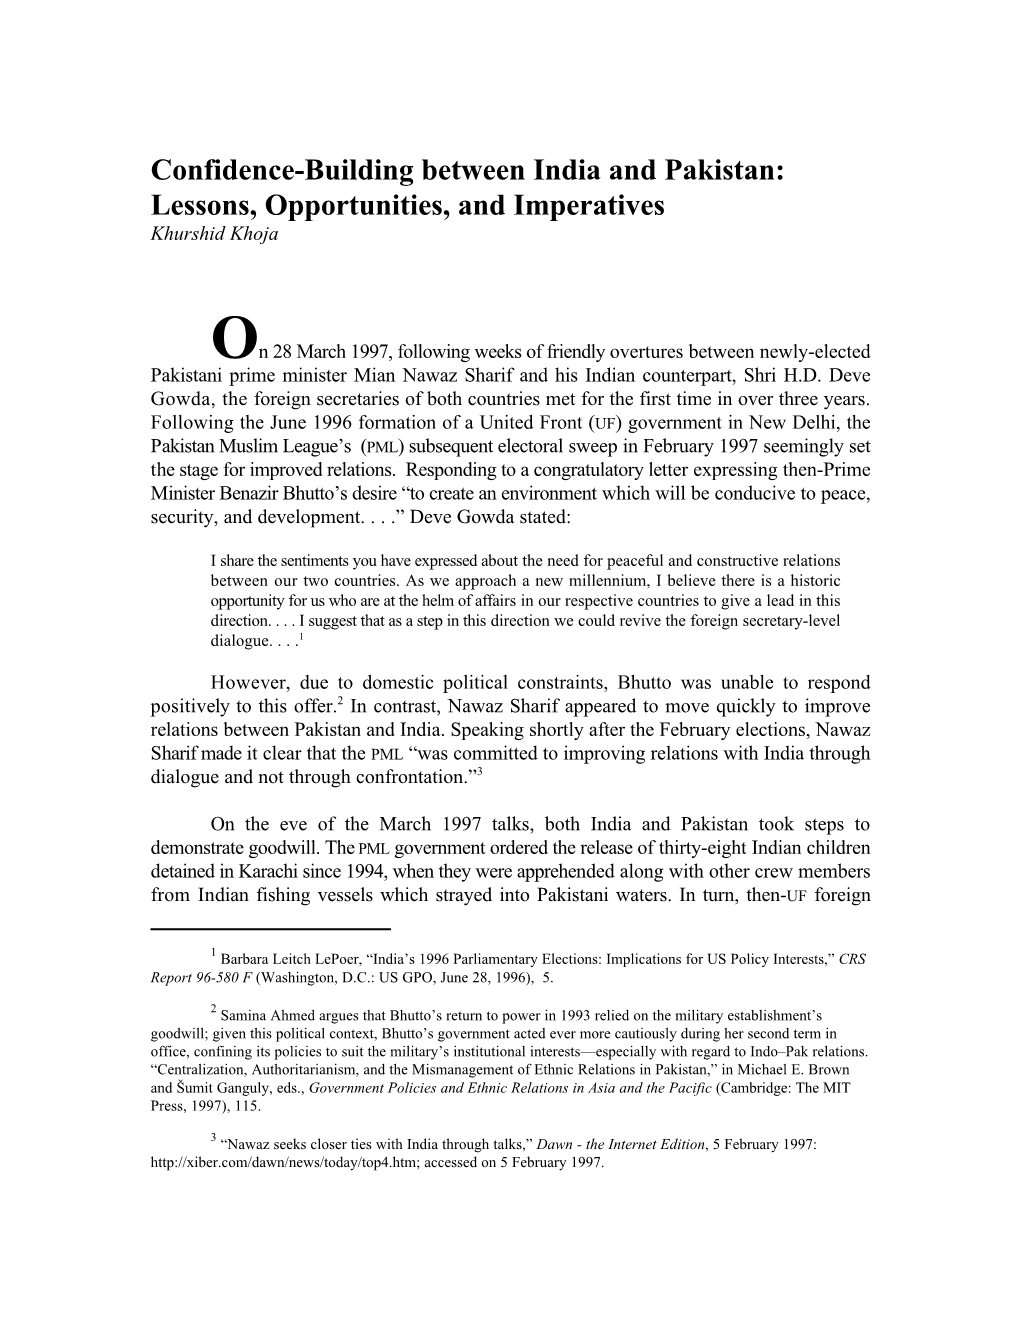 Confidence-Building Between India and Pakistan: Lessons, Opportunities, and Imperatives Khurshid Khoja